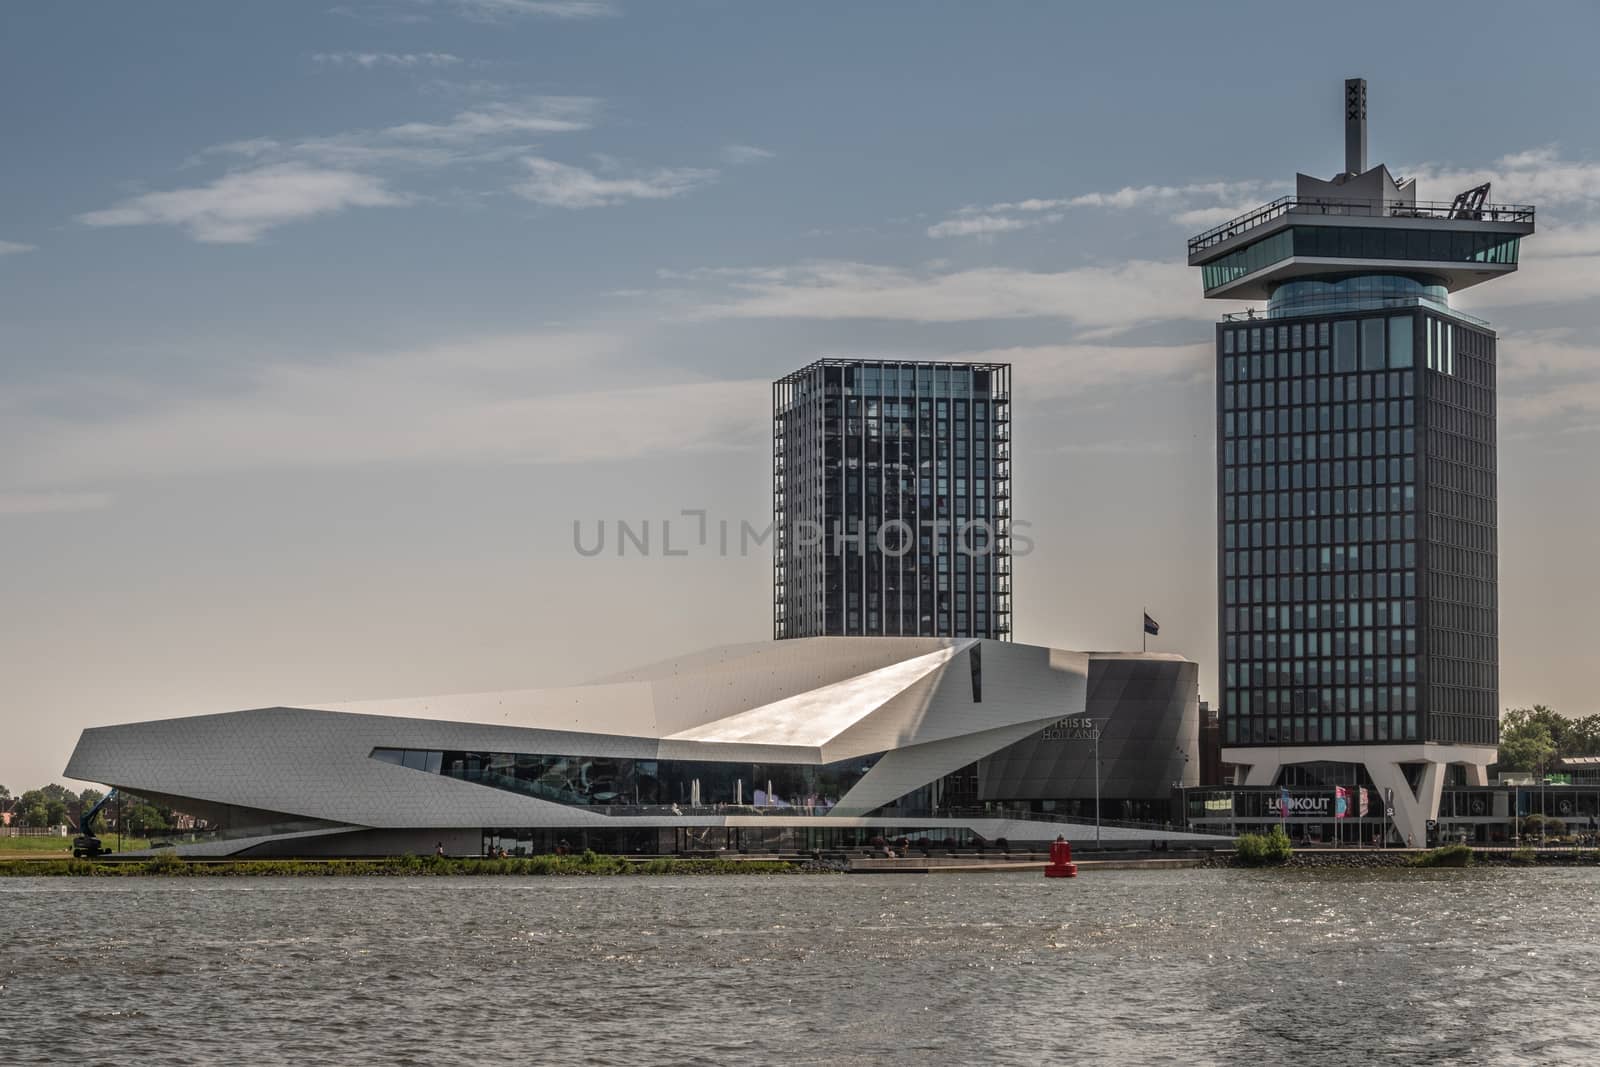 Amsterdam, the Netherlands - June 30, 2019: White Eye Film Museum, A’Dam lookout tower to the right, Clinknoord tower to the left under morning lighted sky. IJ water in front.